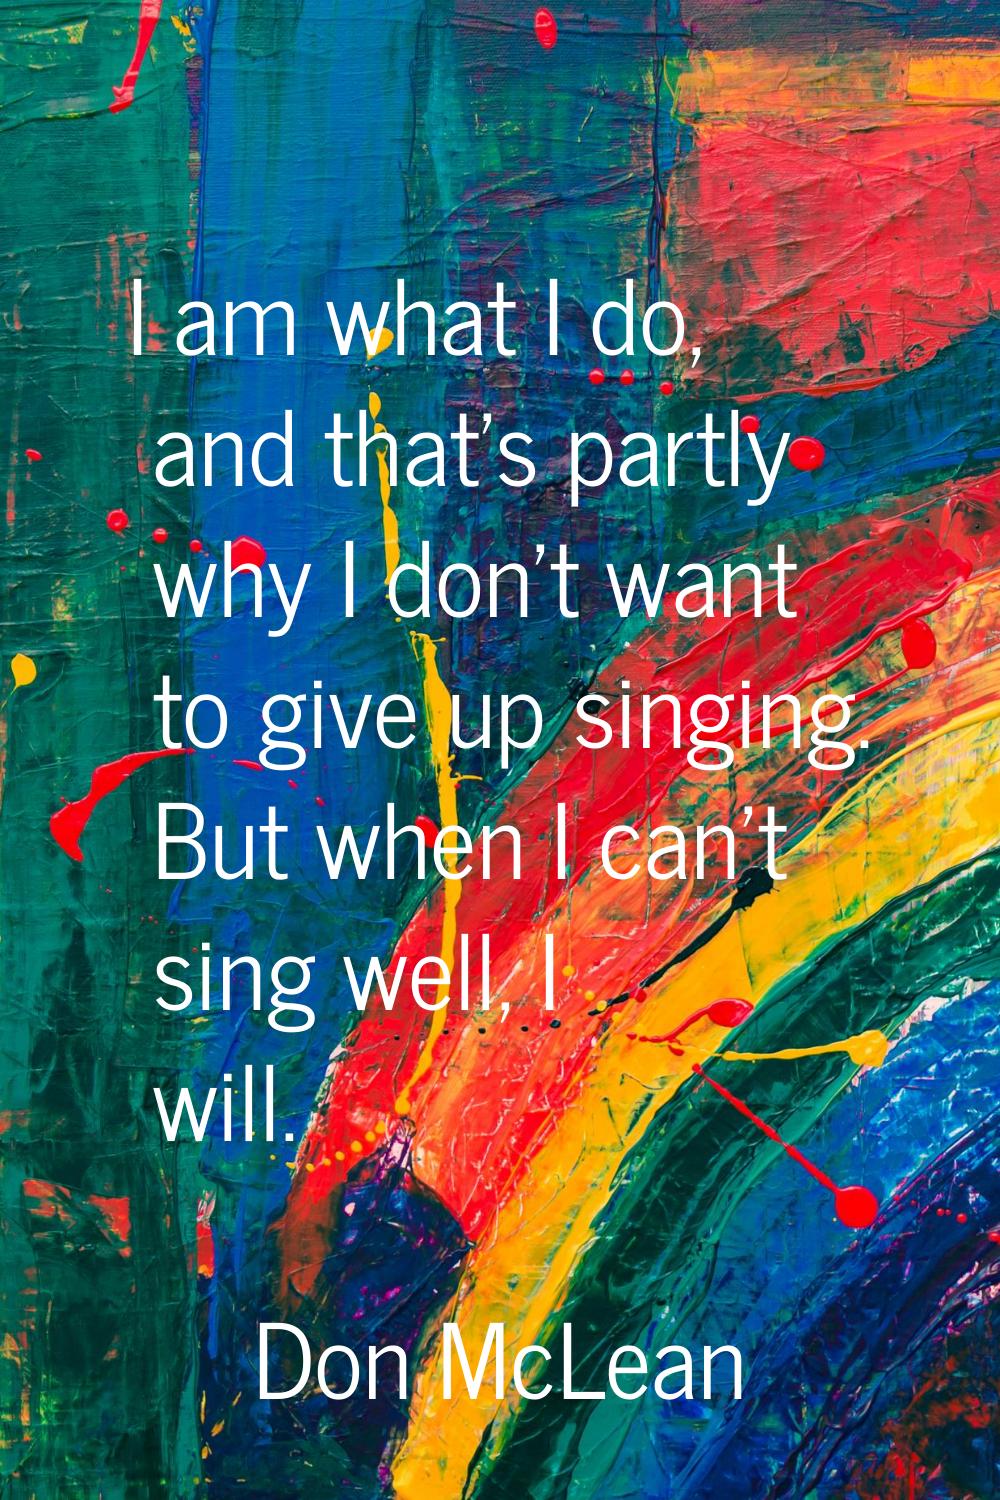 I am what I do, and that's partly why I don't want to give up singing. But when I can't sing well, 